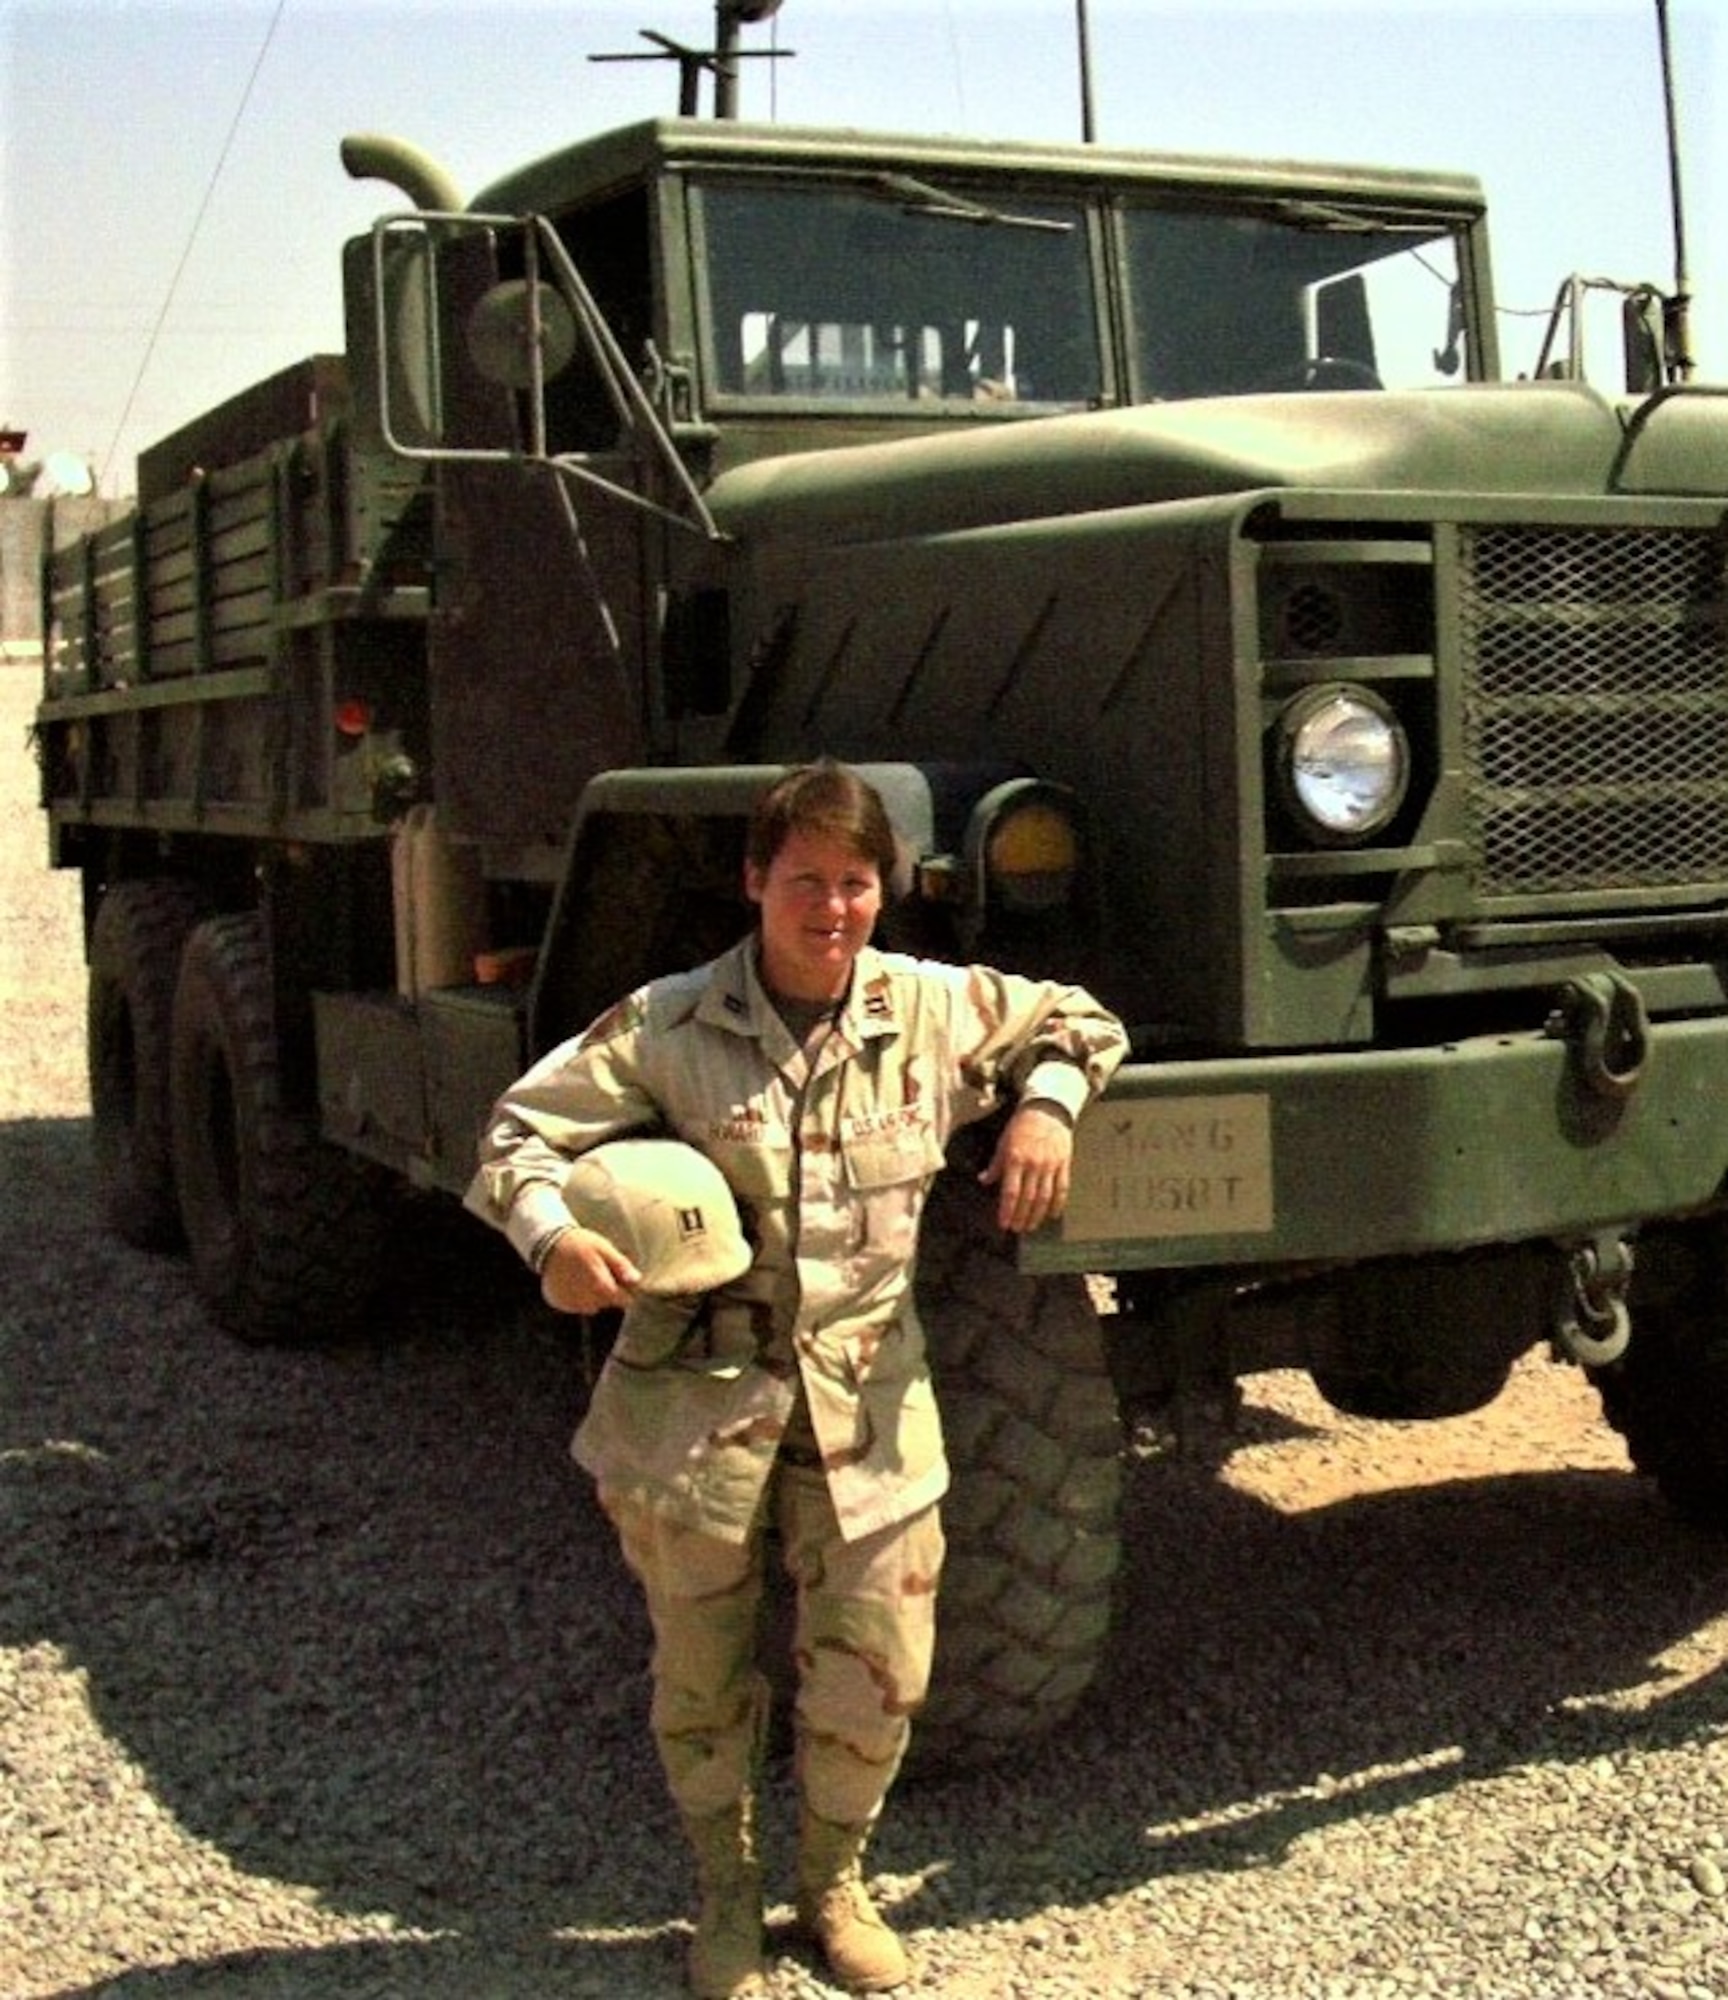 Former Air Force Capt. Annette Martiny poses alongside an M923 5-ton series cargo truck at an undisclosed location in Iraq, Sept. 3, 2004. Commissioned as an officer in 1999, Martiny deployed three times as a logistics plans officer in her 22-year Air Force career. (Courtesy photo)